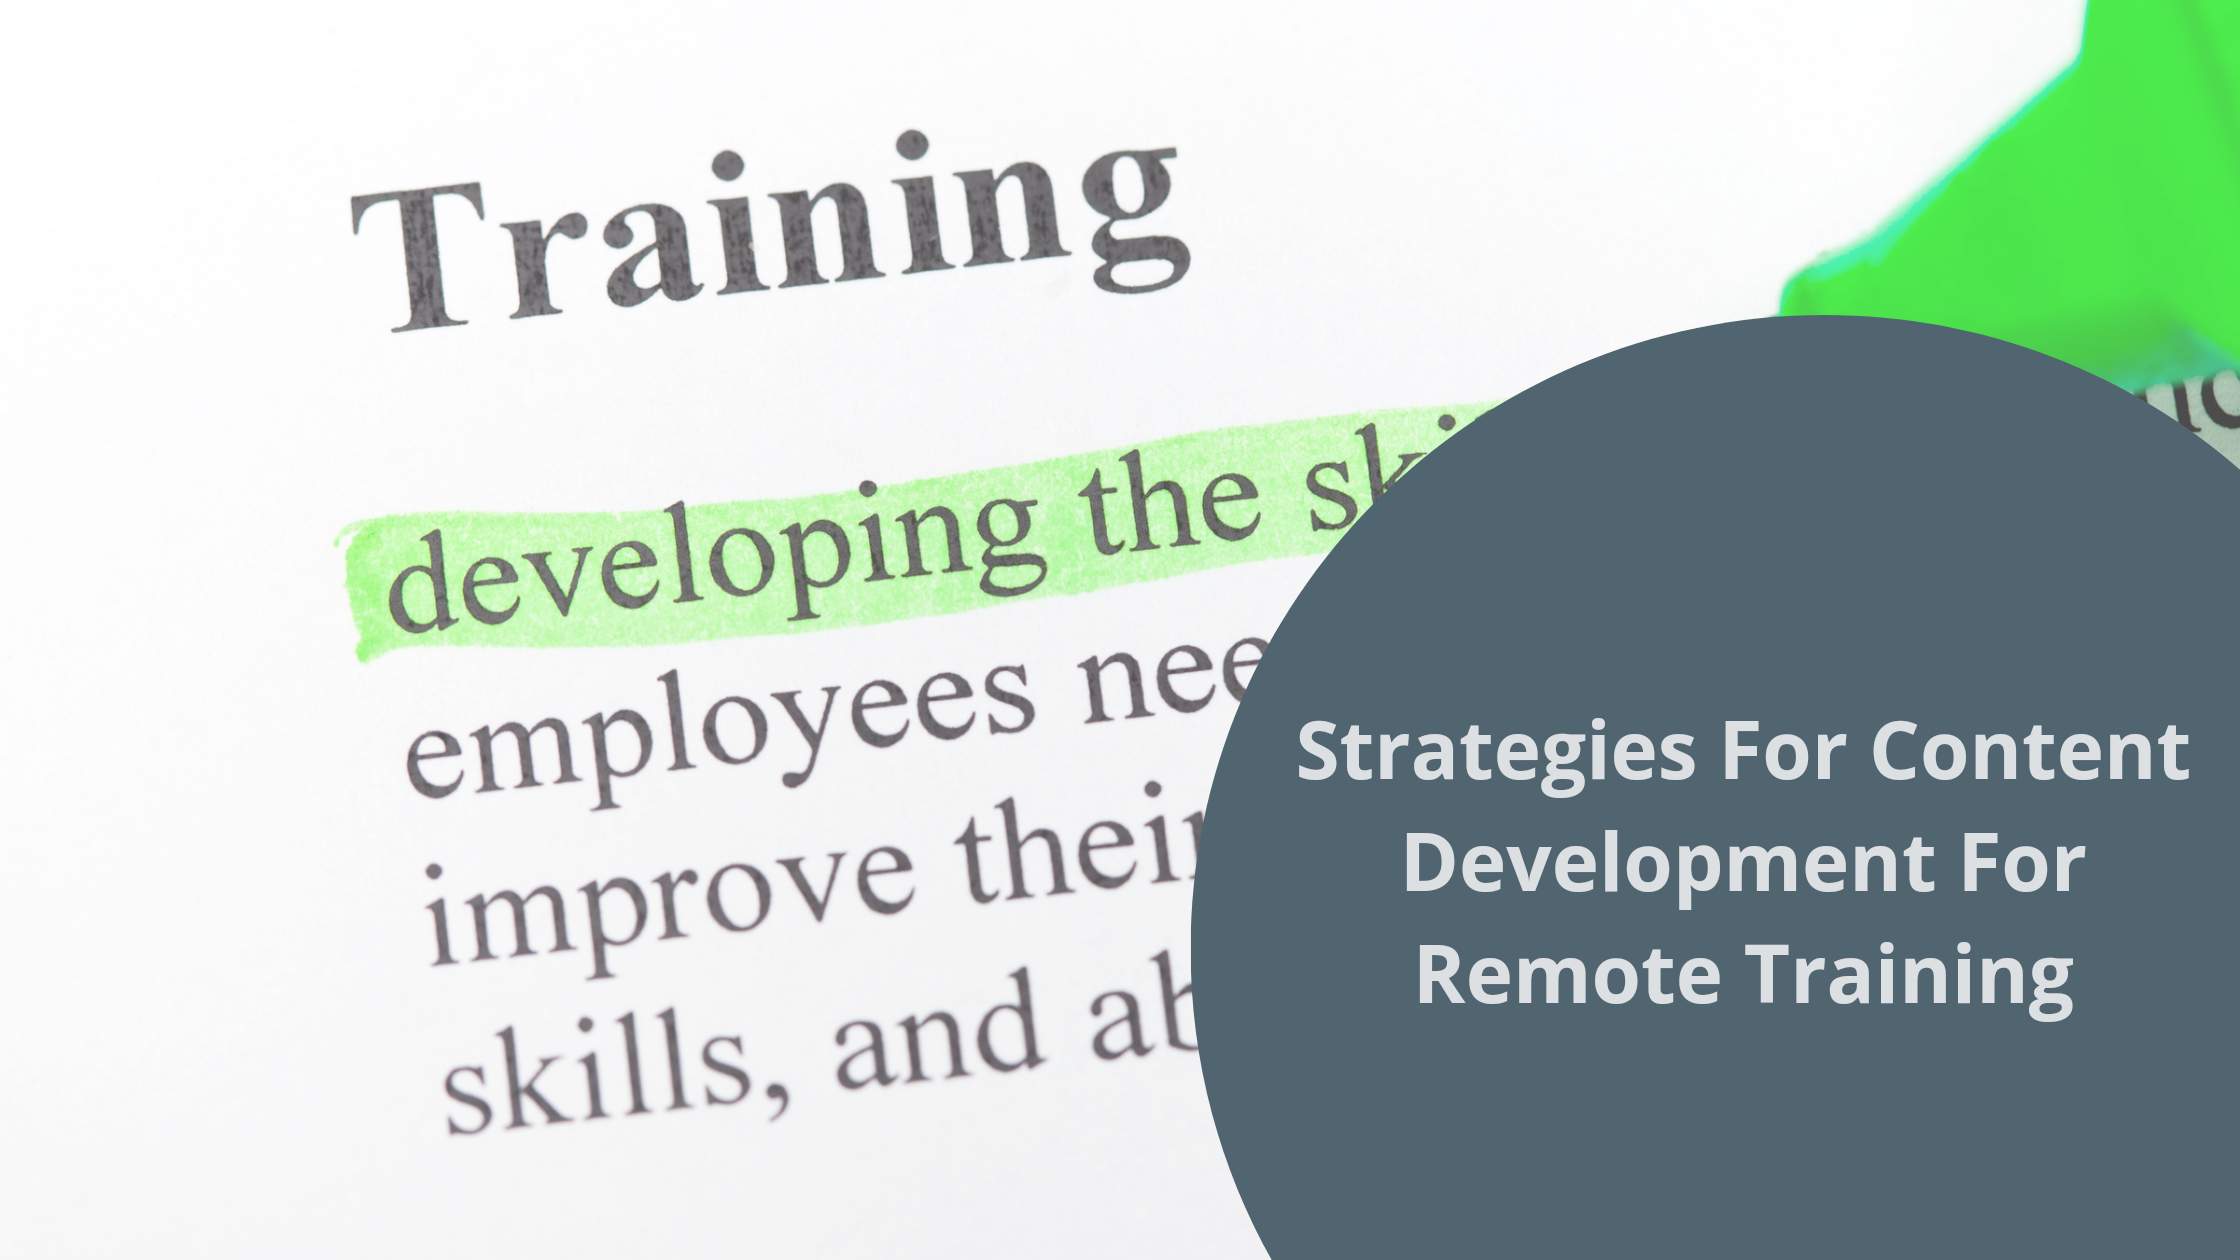 7 strategies for content development for remote training | bookafy